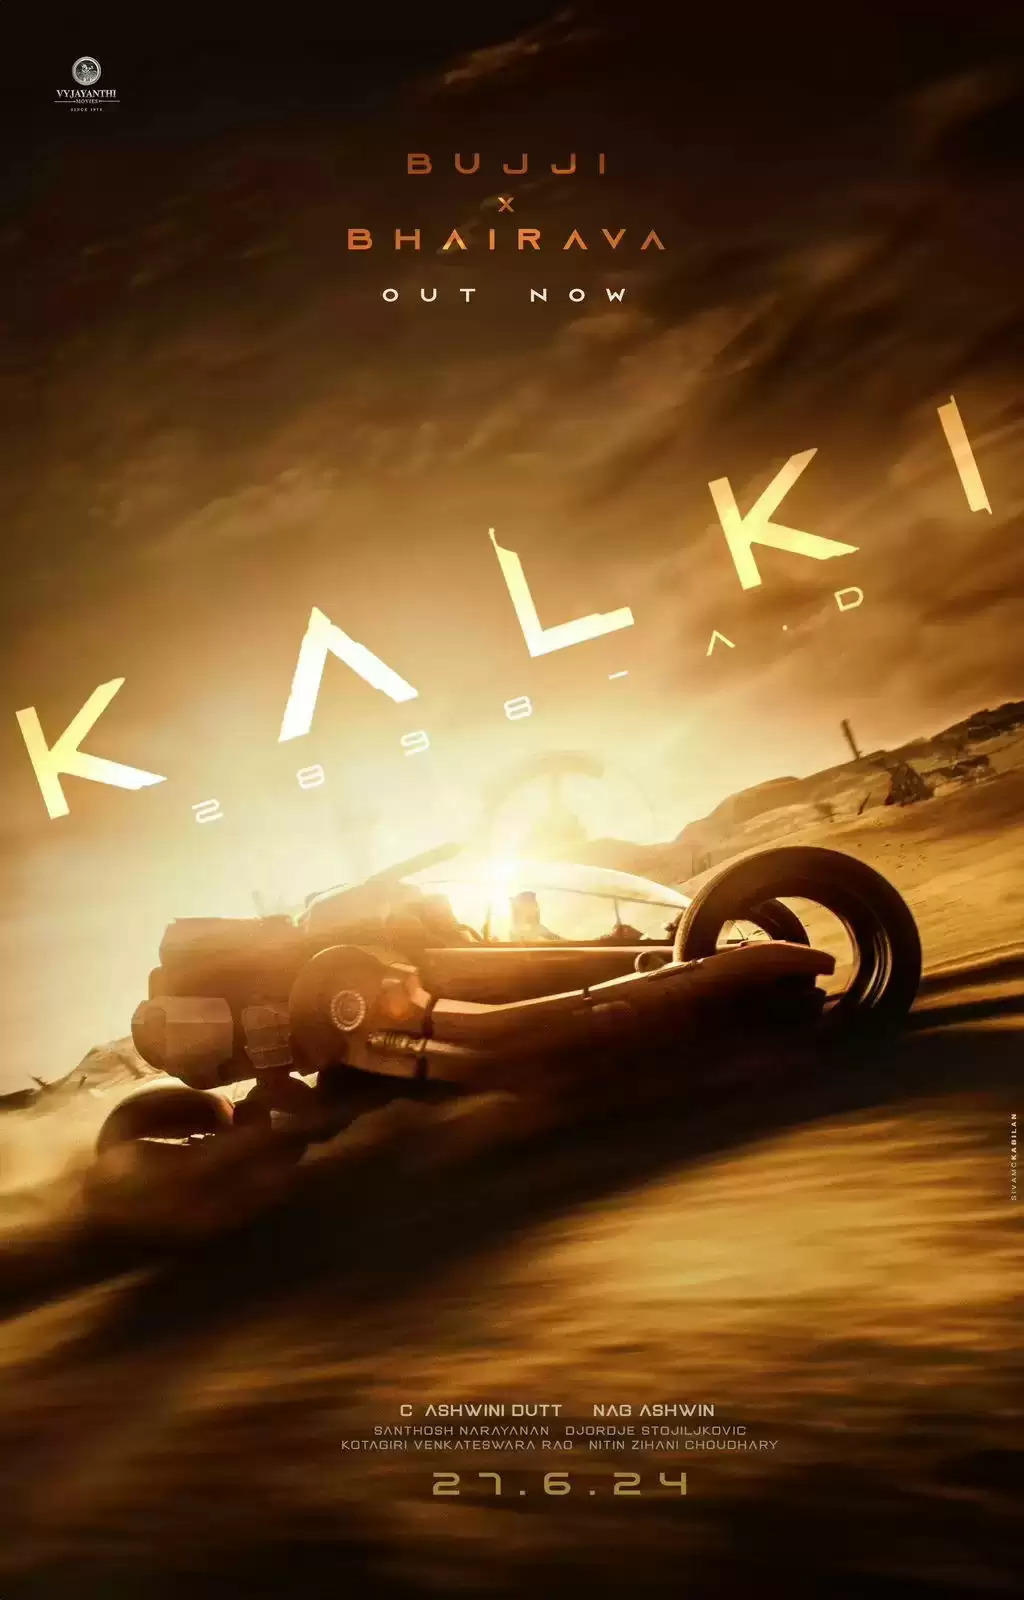 Presenting ‘BUJJI’ - The Futuristic Vehicle and Prabhas’ Best Friend in ‘Kalki 2898 AD’, unveiled in a spectacular launch event and official preview attended by 20,000 fans in Hyderabad
​​​​​​​